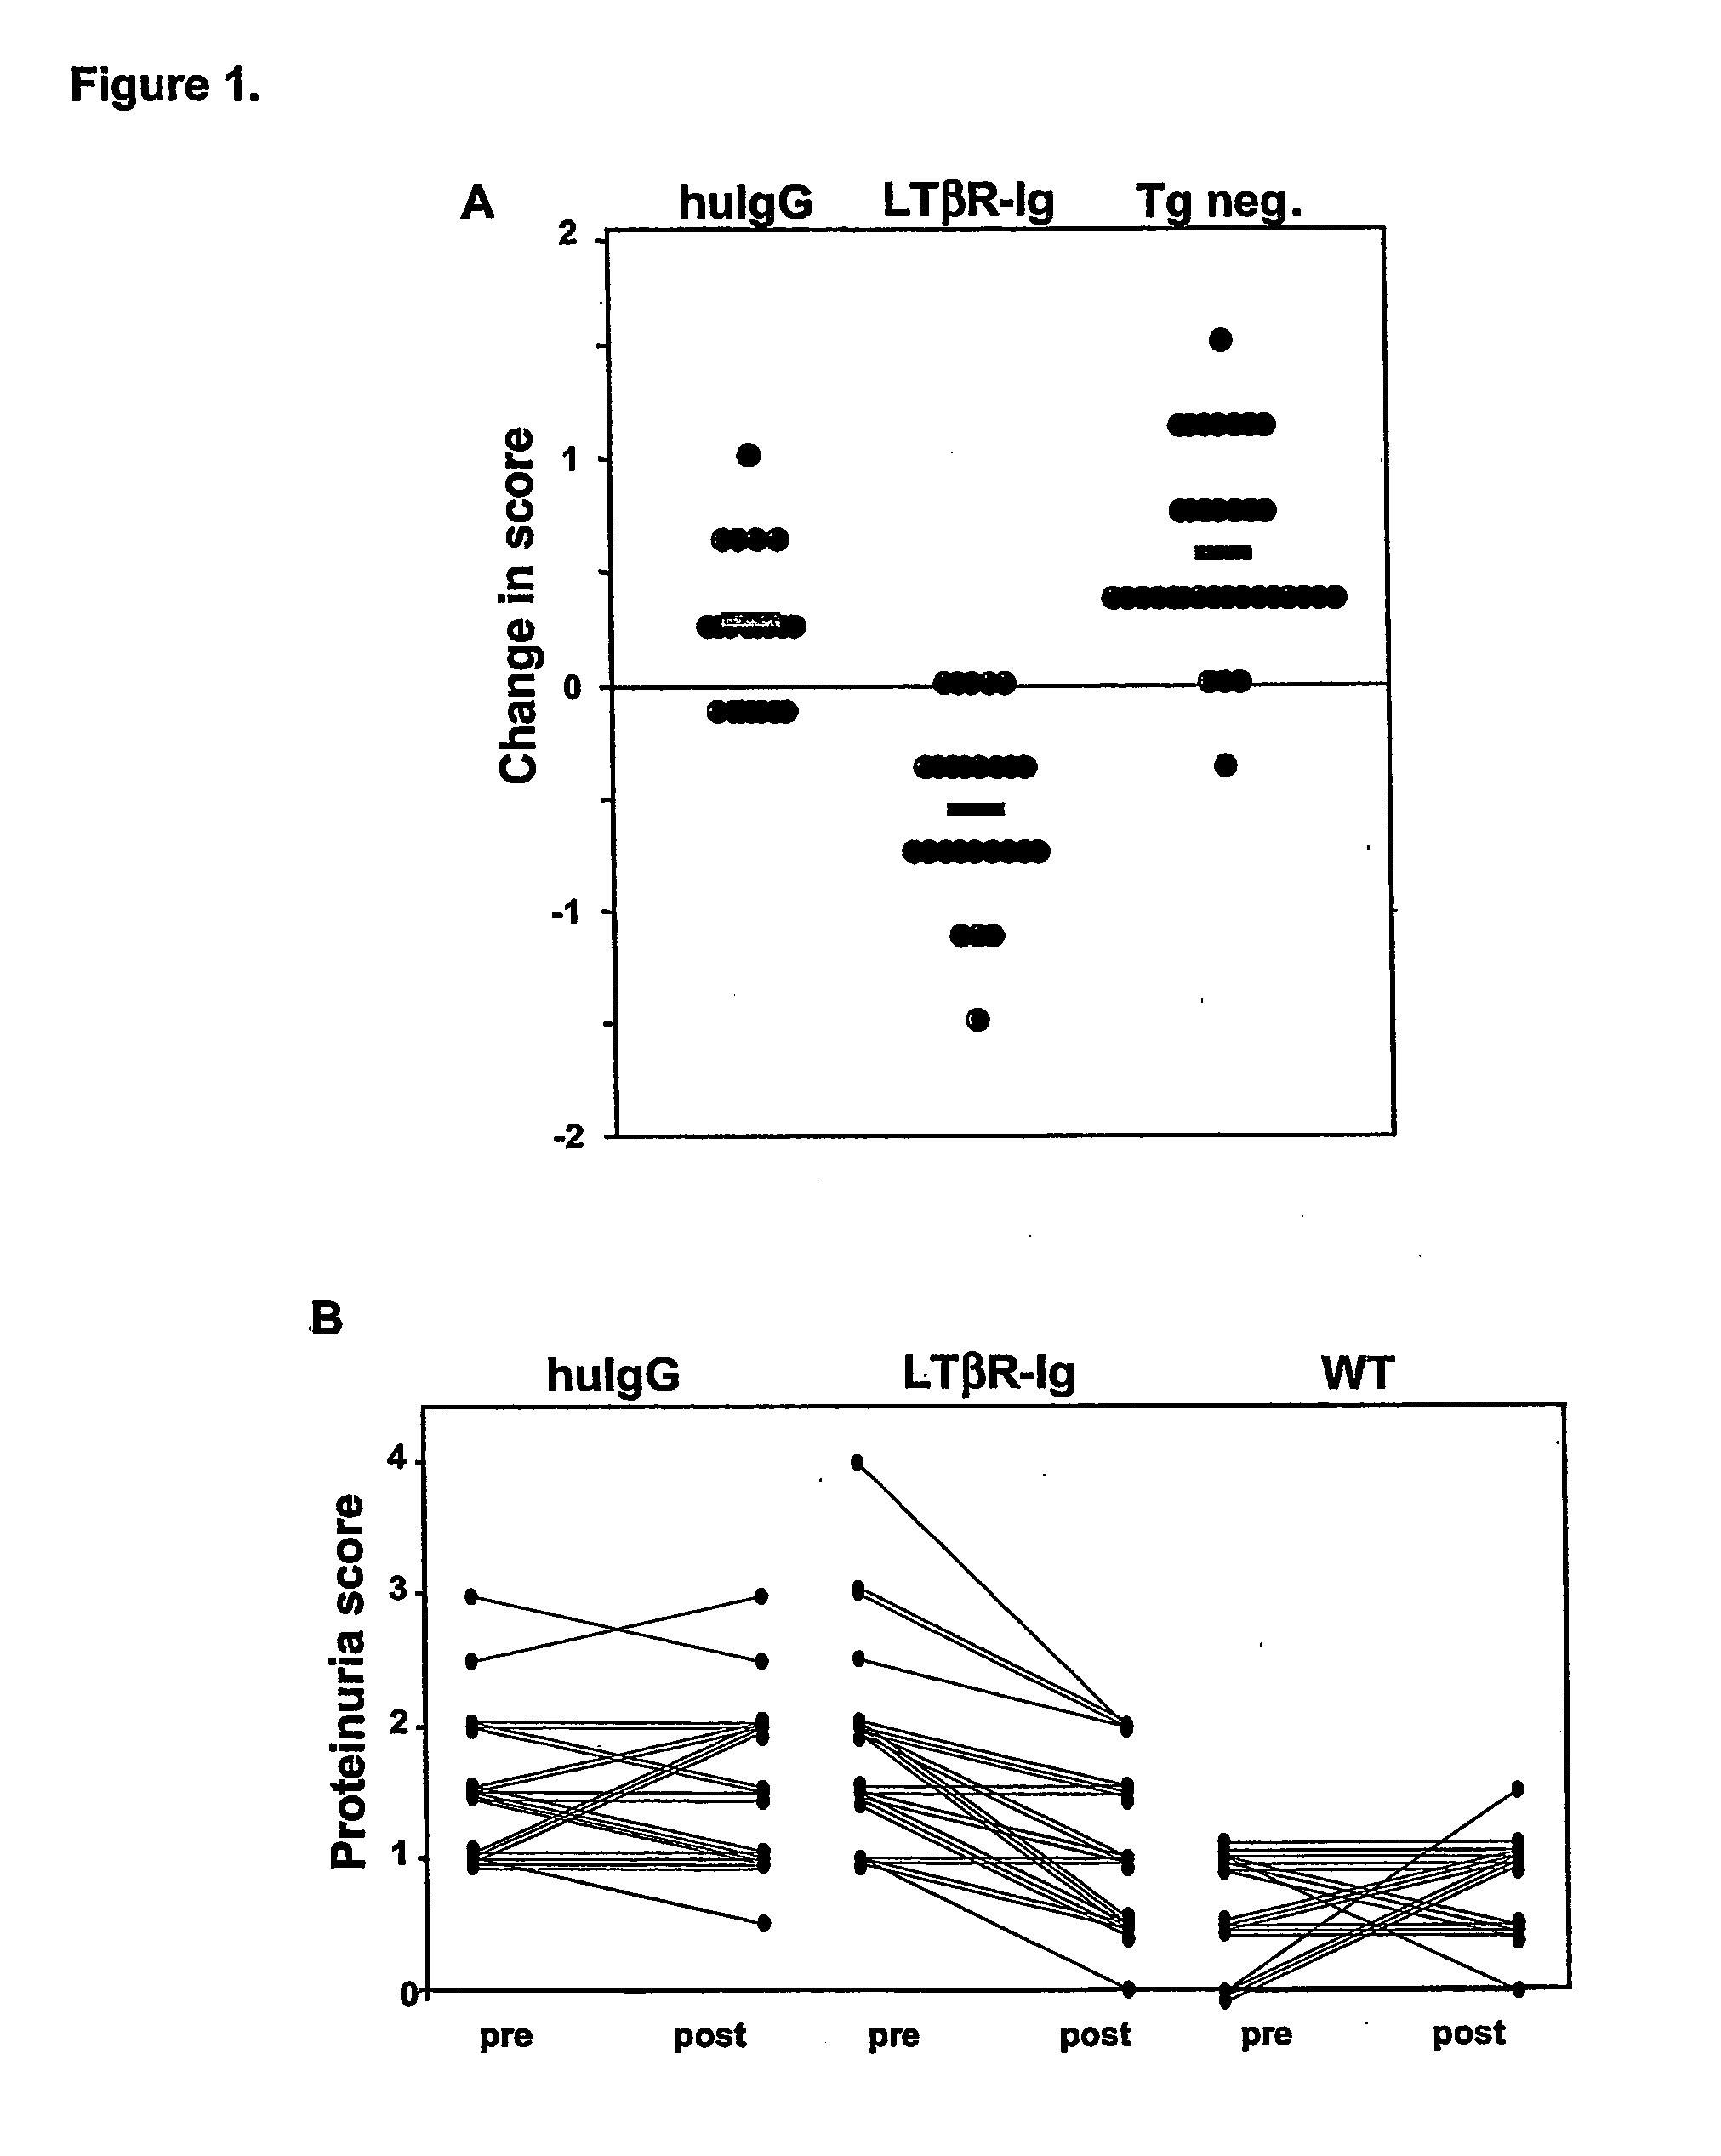 Treatment of immunological renal disorders by lymphotoxin pathway inhibitors